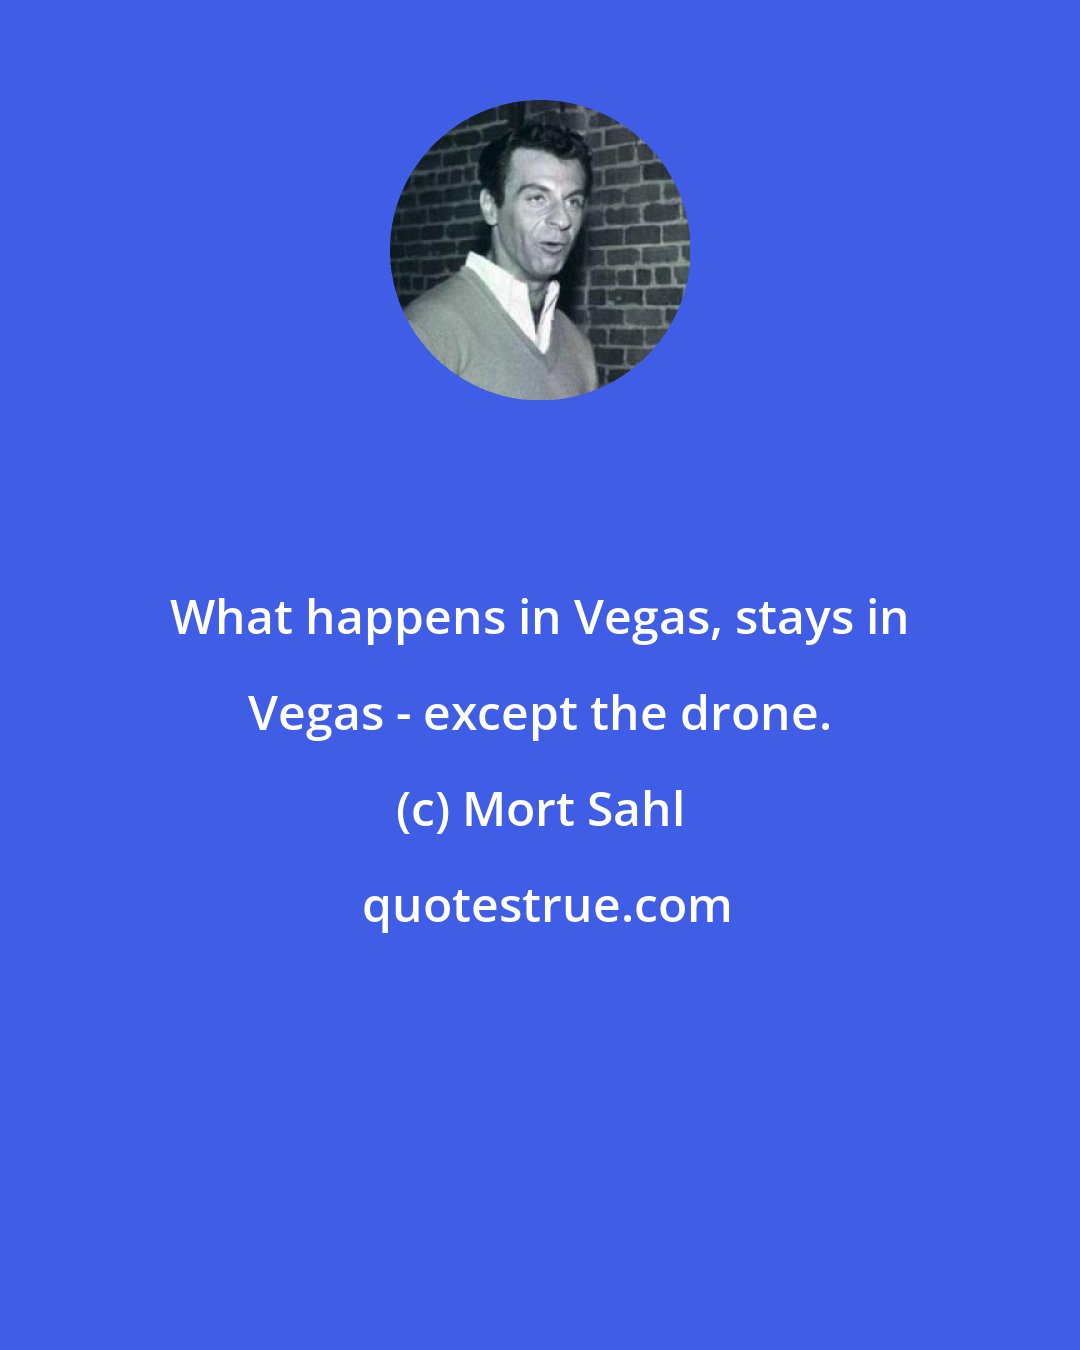 Mort Sahl: What happens in Vegas, stays in Vegas - except the drone.